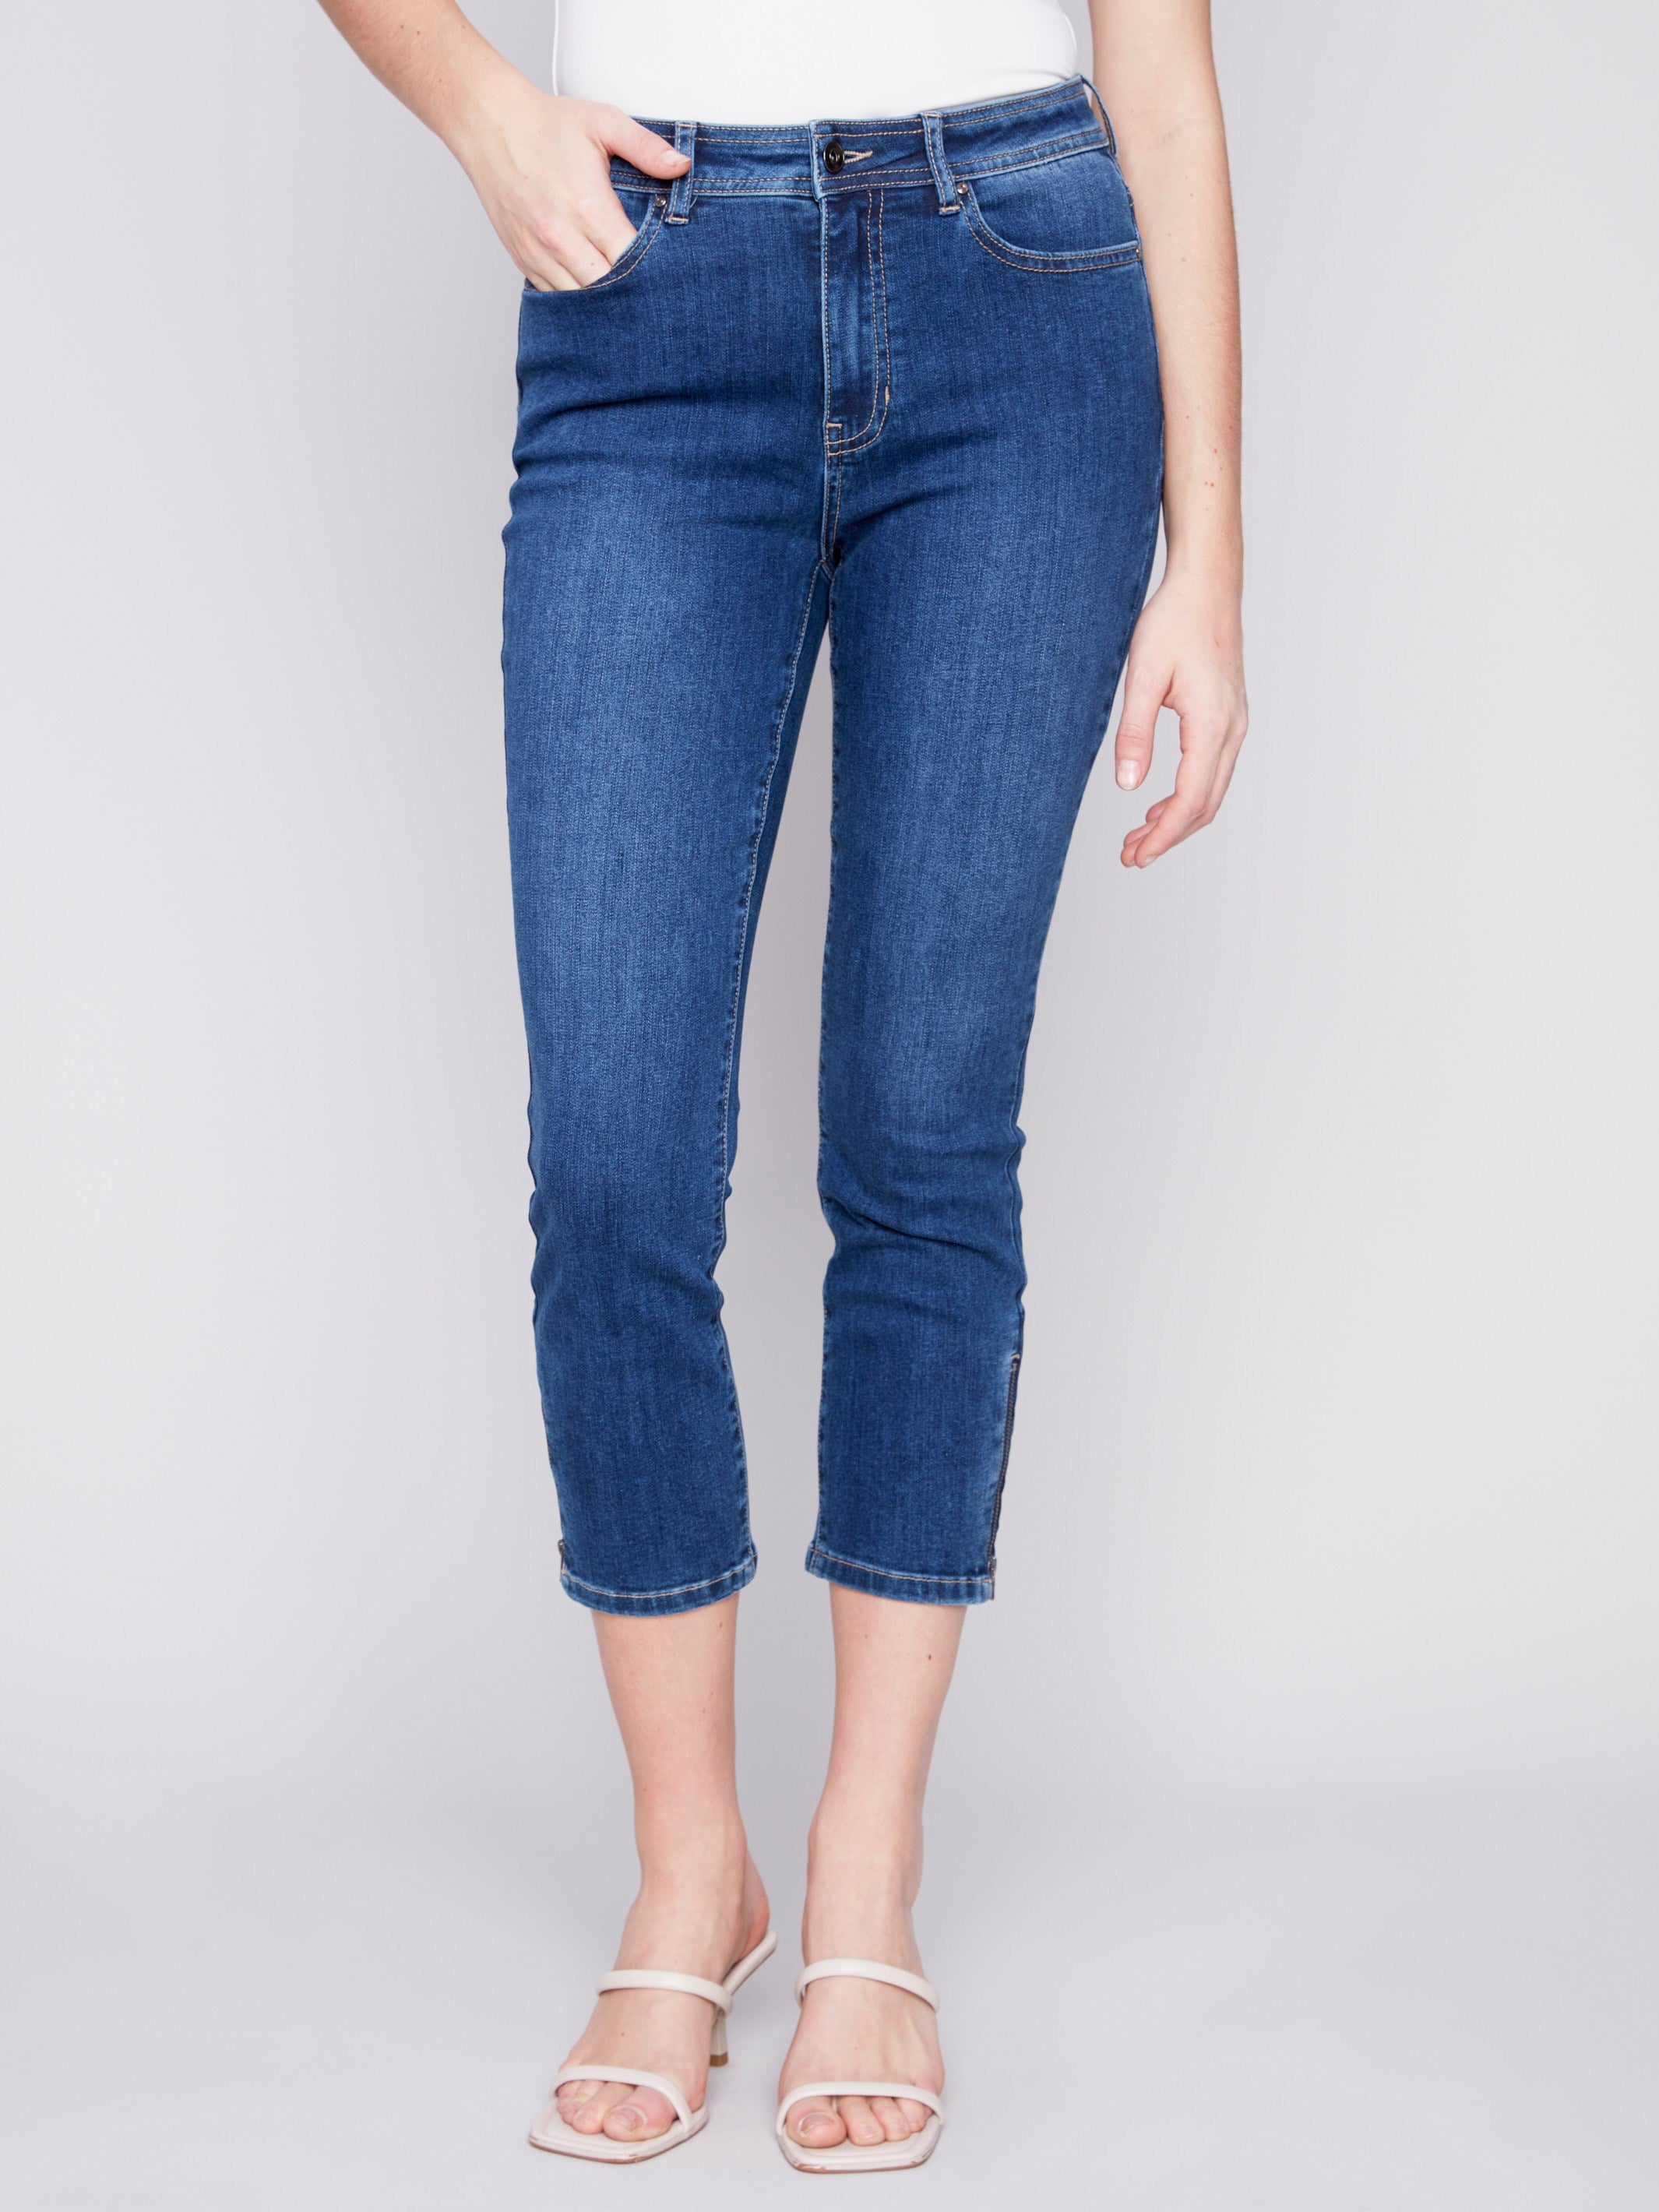 Cropped Jeans with Zipper Detail - Indigo - Charlie B Collection Canada - Image 2